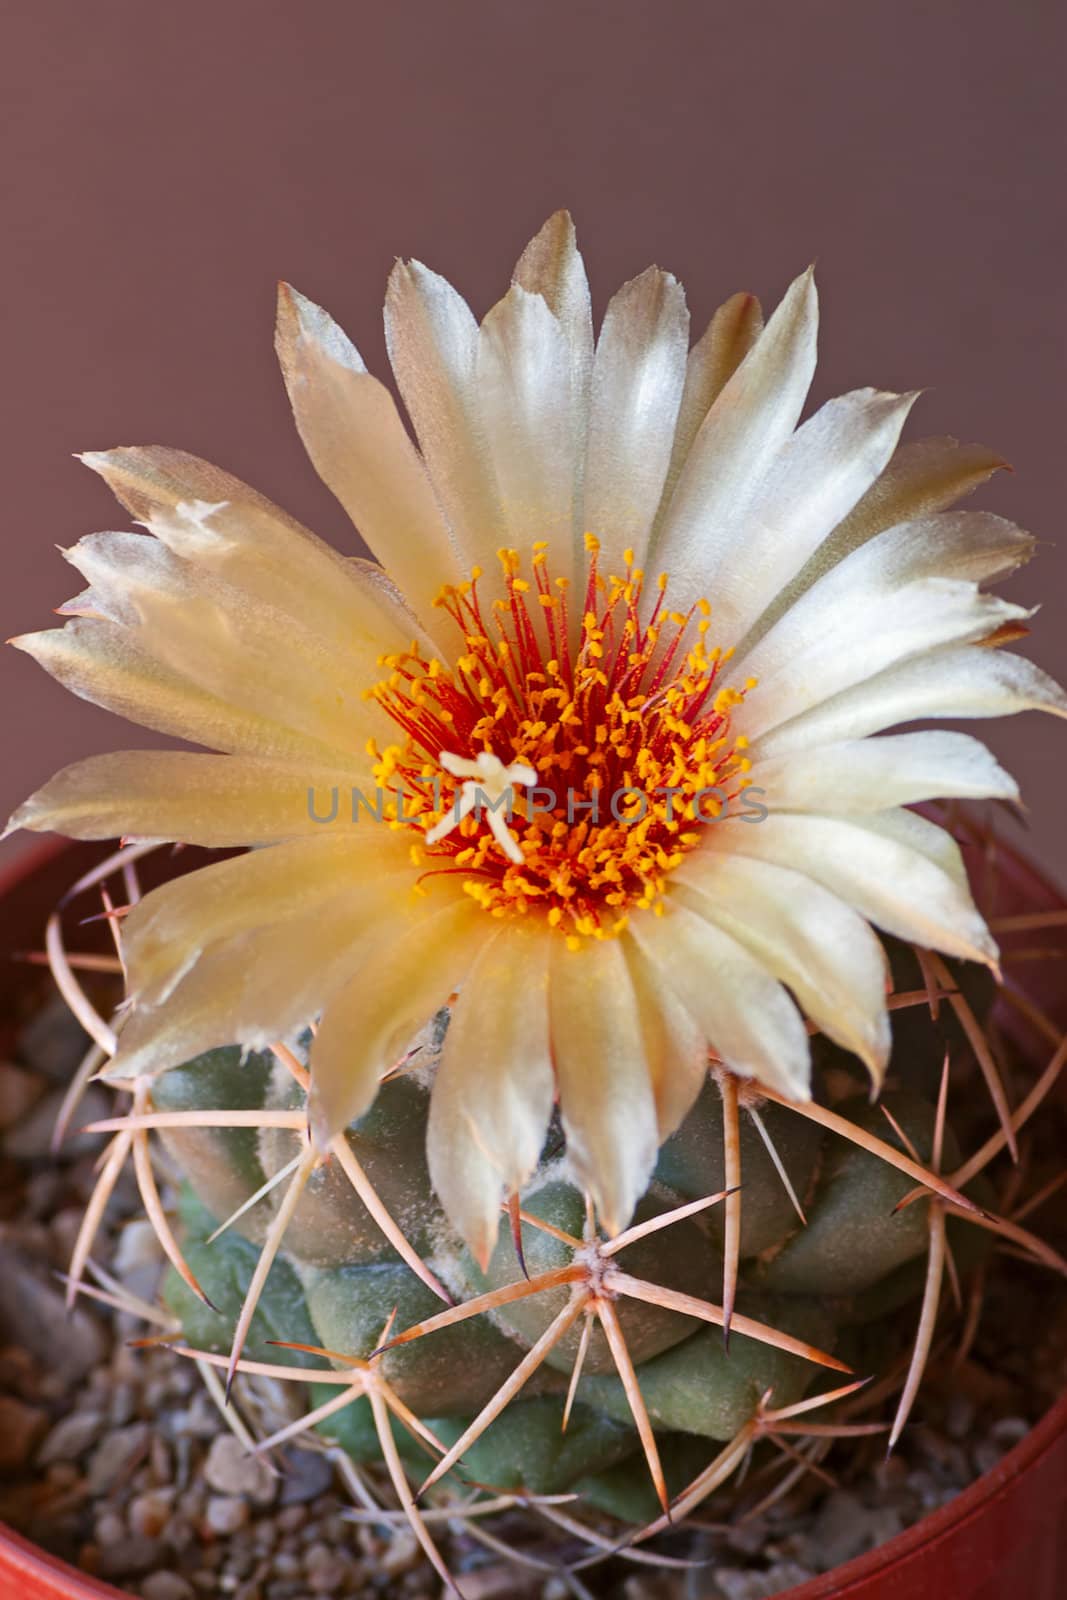 Cactus flower  on dark  background.Image with shallow depth of field.